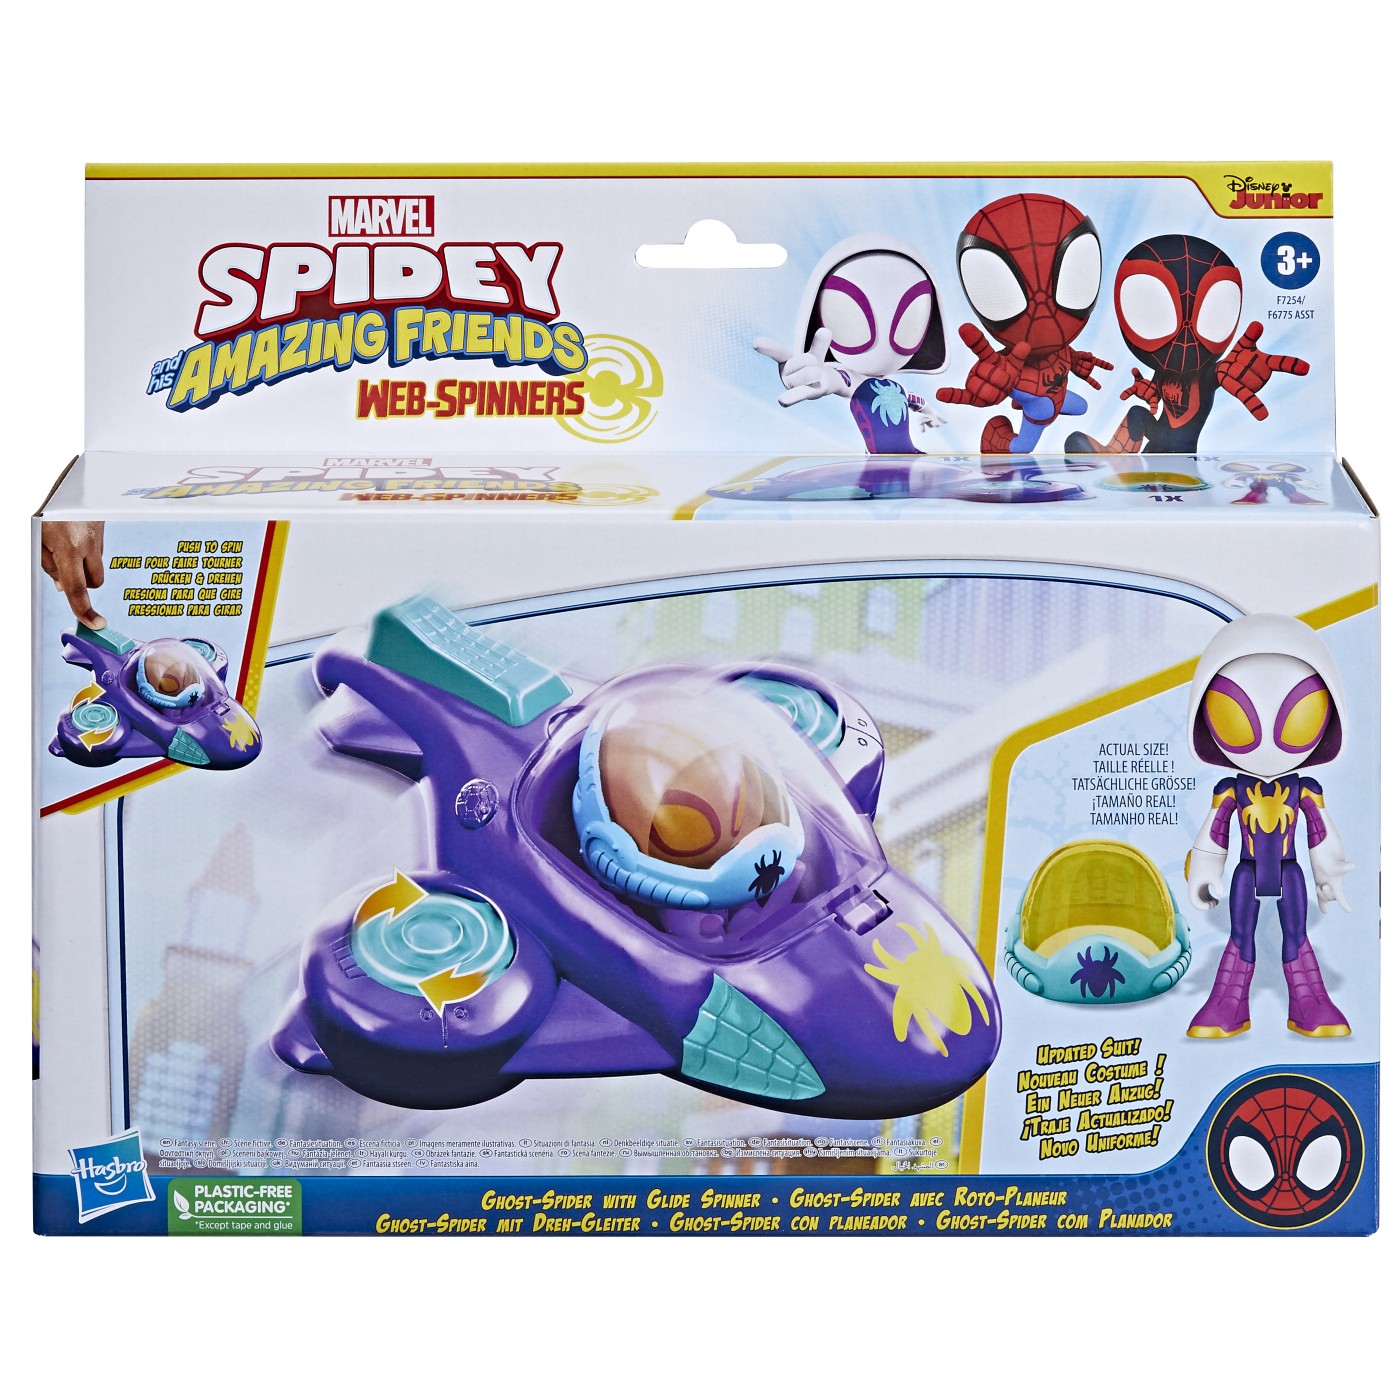 Set de joaca - Spidey And His Amazing Friends Web-Spinners - Ghost-Spider with Glide Spinner | Hasbro